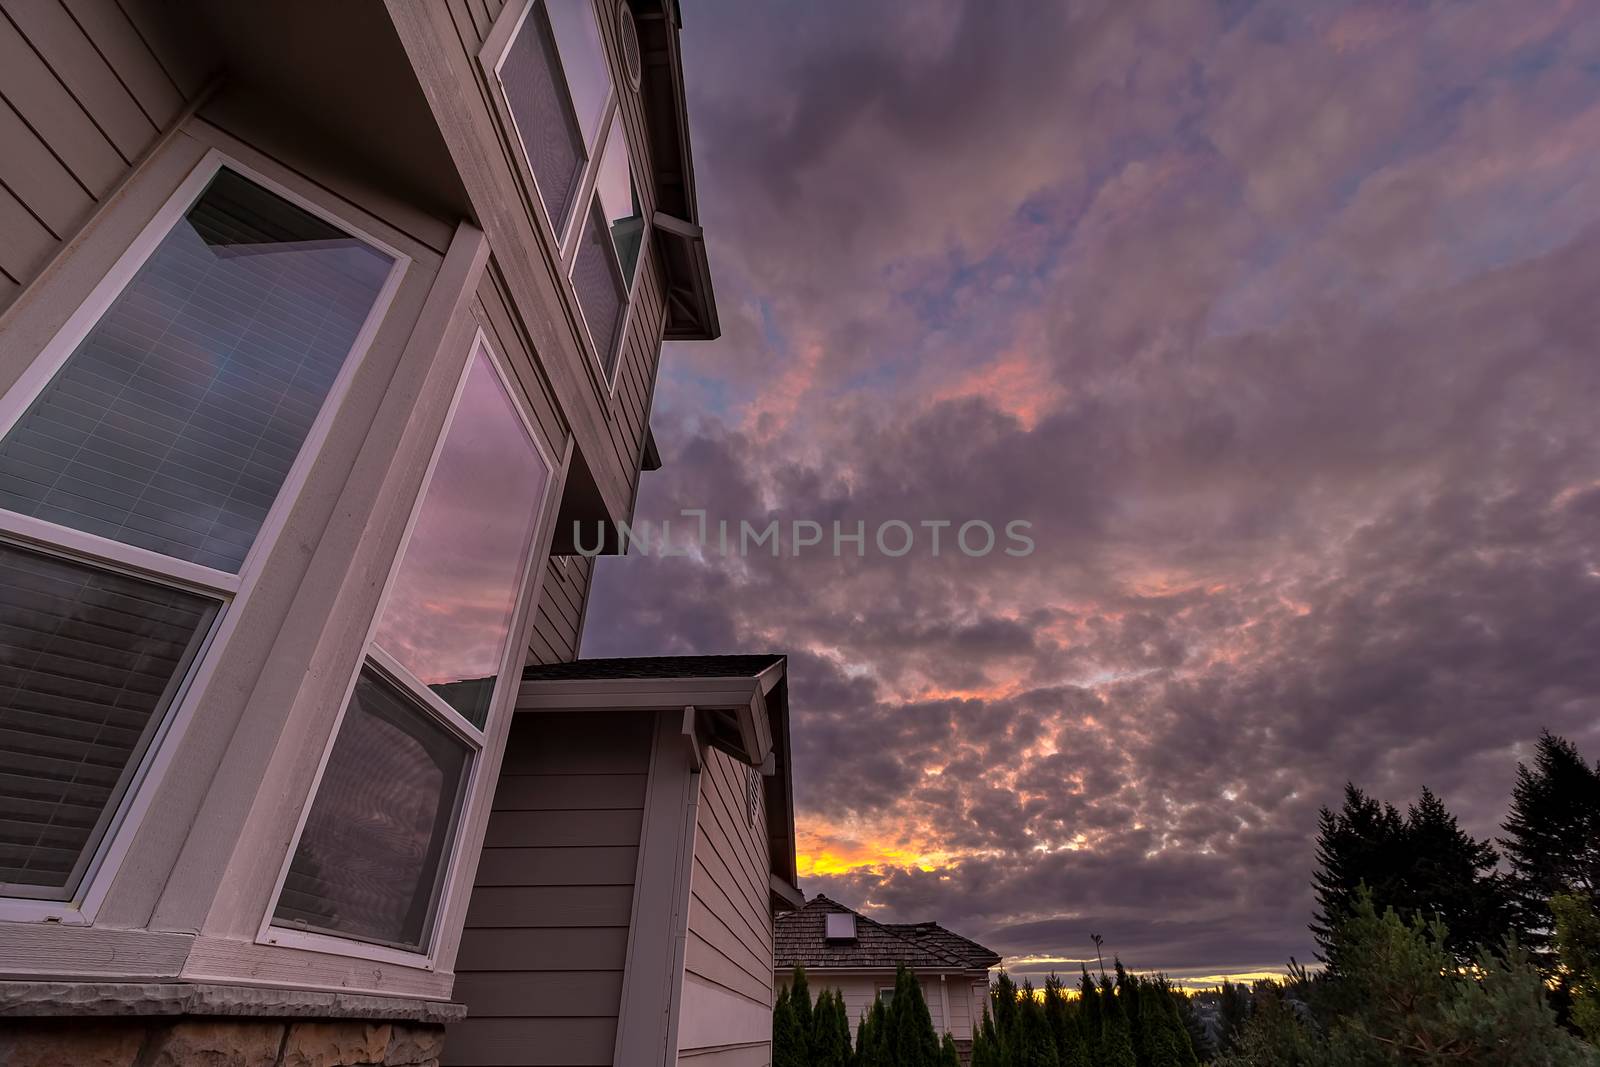 Reflection of Sunset on House Windows by jpldesigns